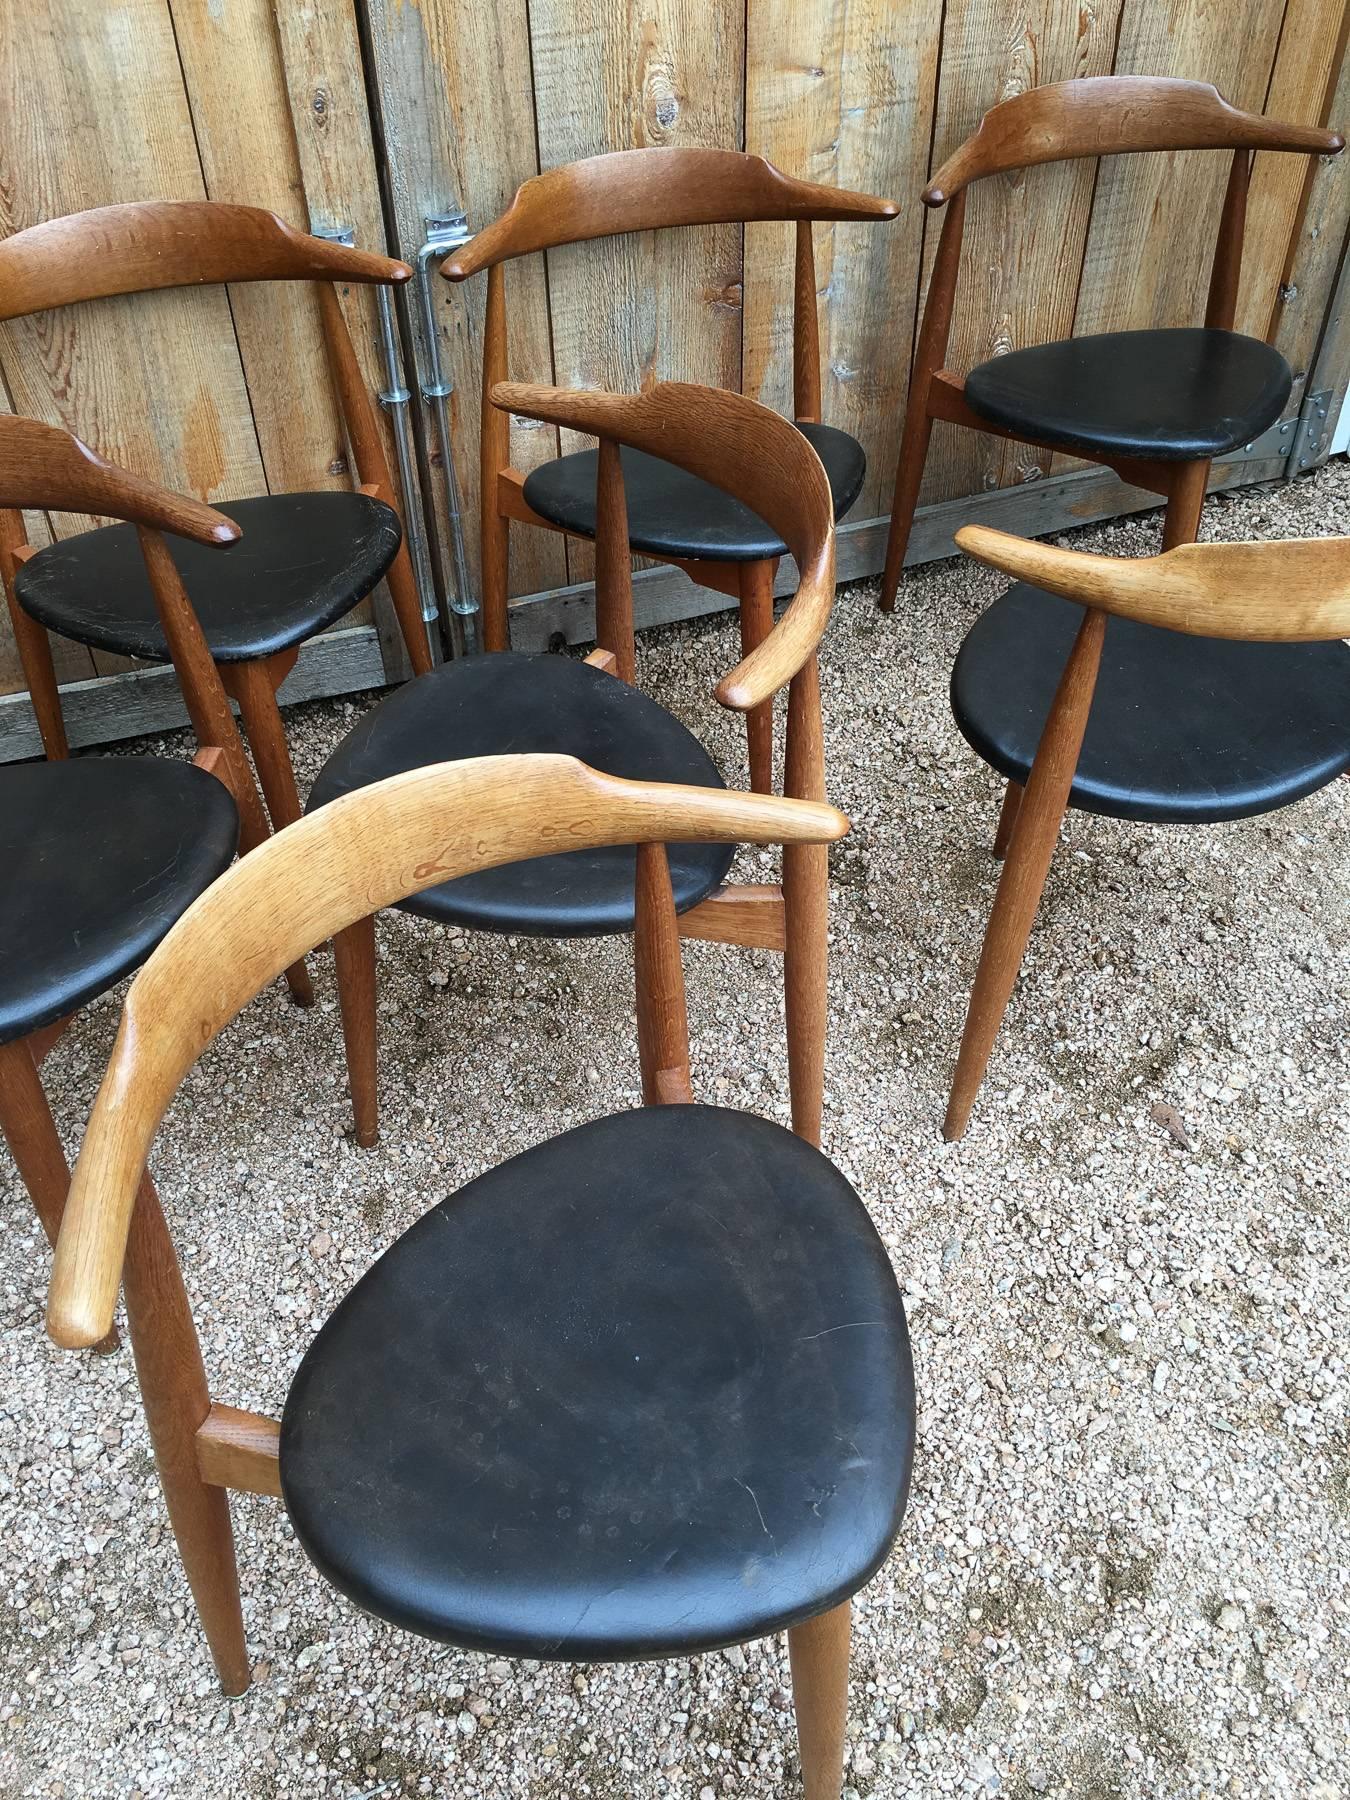 Rare set of eight dining chairs designed by Hans Wegner, model- the Heart chair. Manufactured by Fritz Hansen. Three-legged oak frames with original black leather seats. Nice wear and patina.